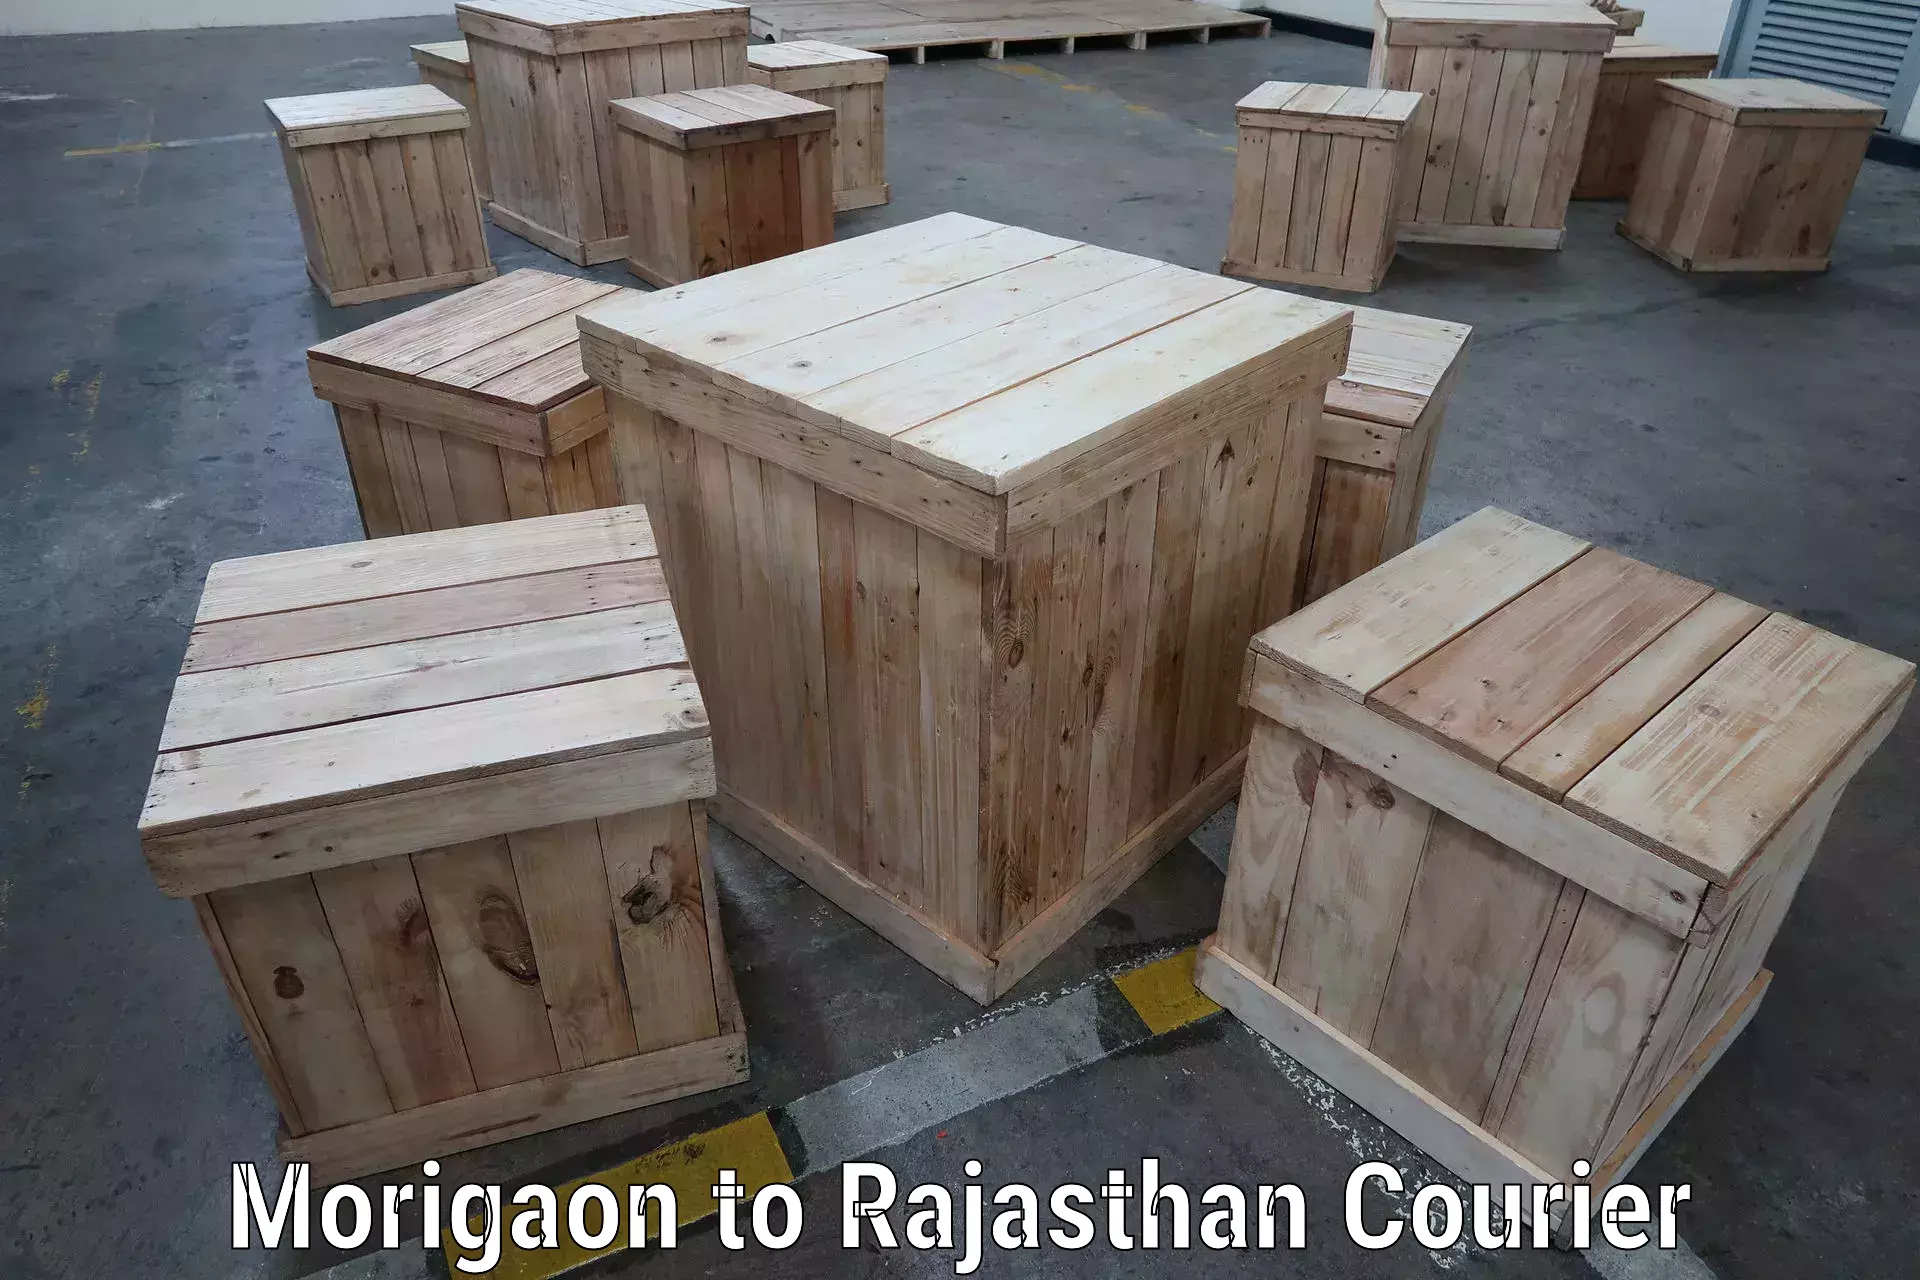 Supply chain efficiency in Morigaon to Rajasthan